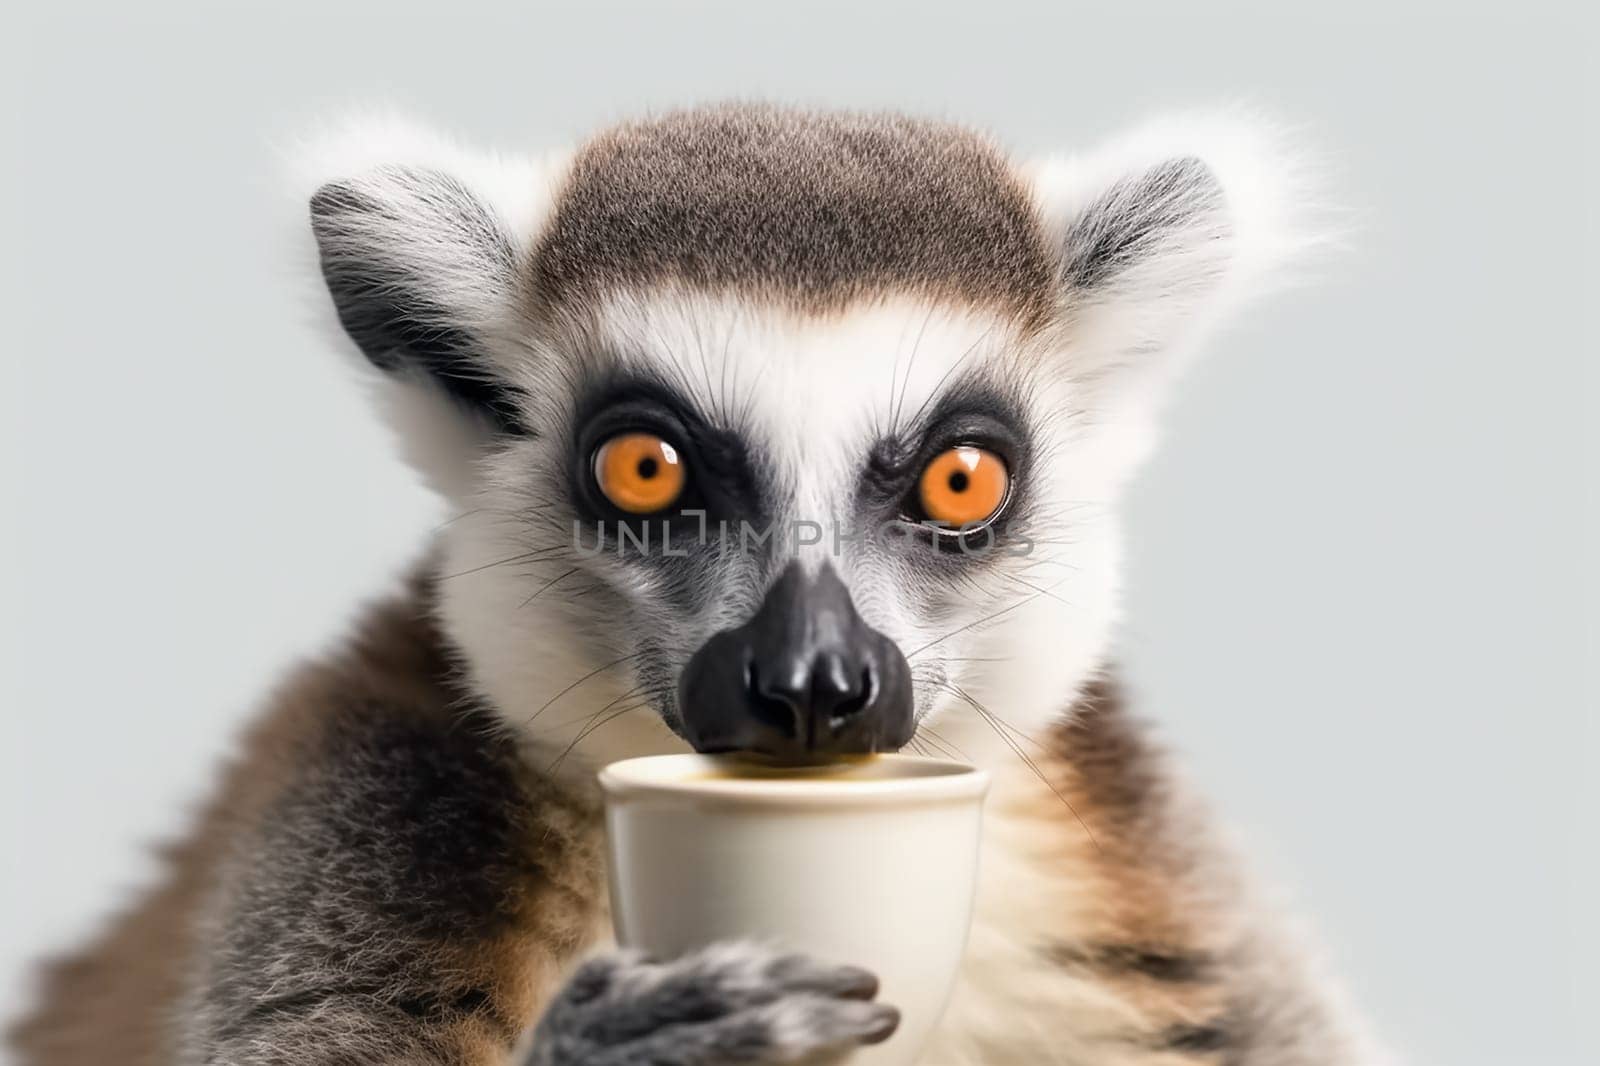 Portrait of a funny lemur drinking coffee from a paper cup and looking at the camera. Portrait of Ring-tailed lemur with big yellow eyes close up.